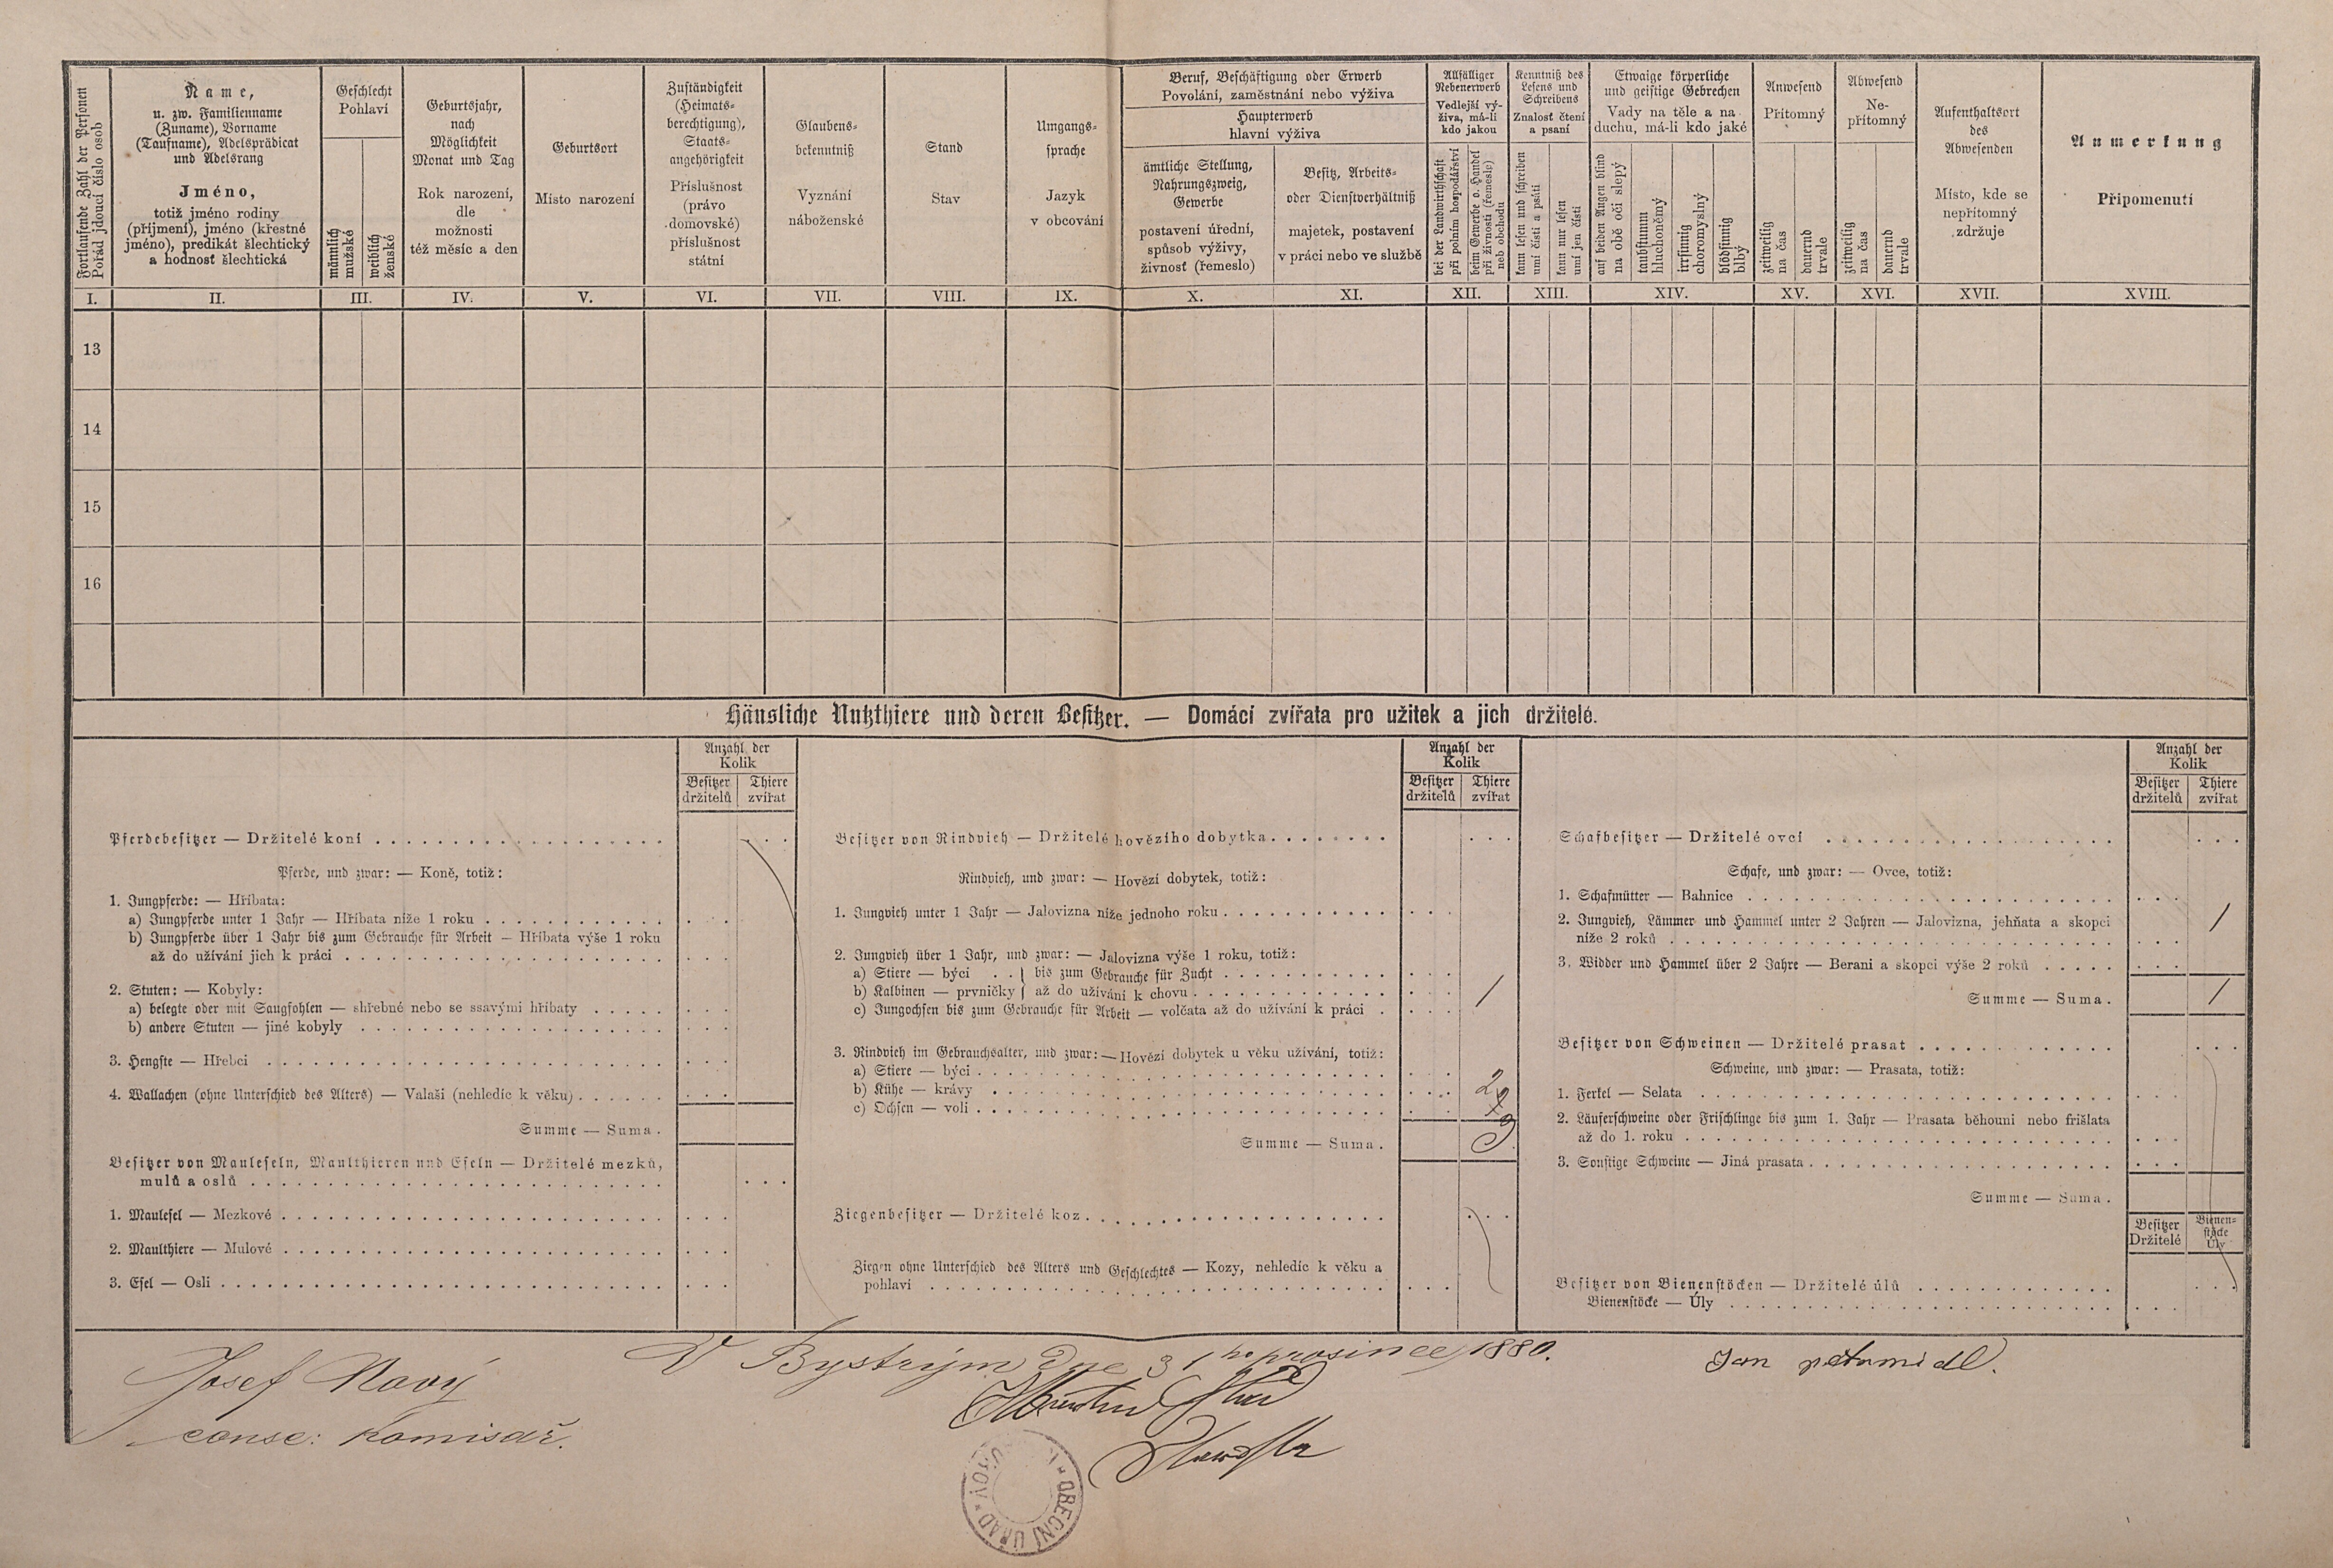 2. soap-kt_01159_census-1880-bystre-cp015_0020